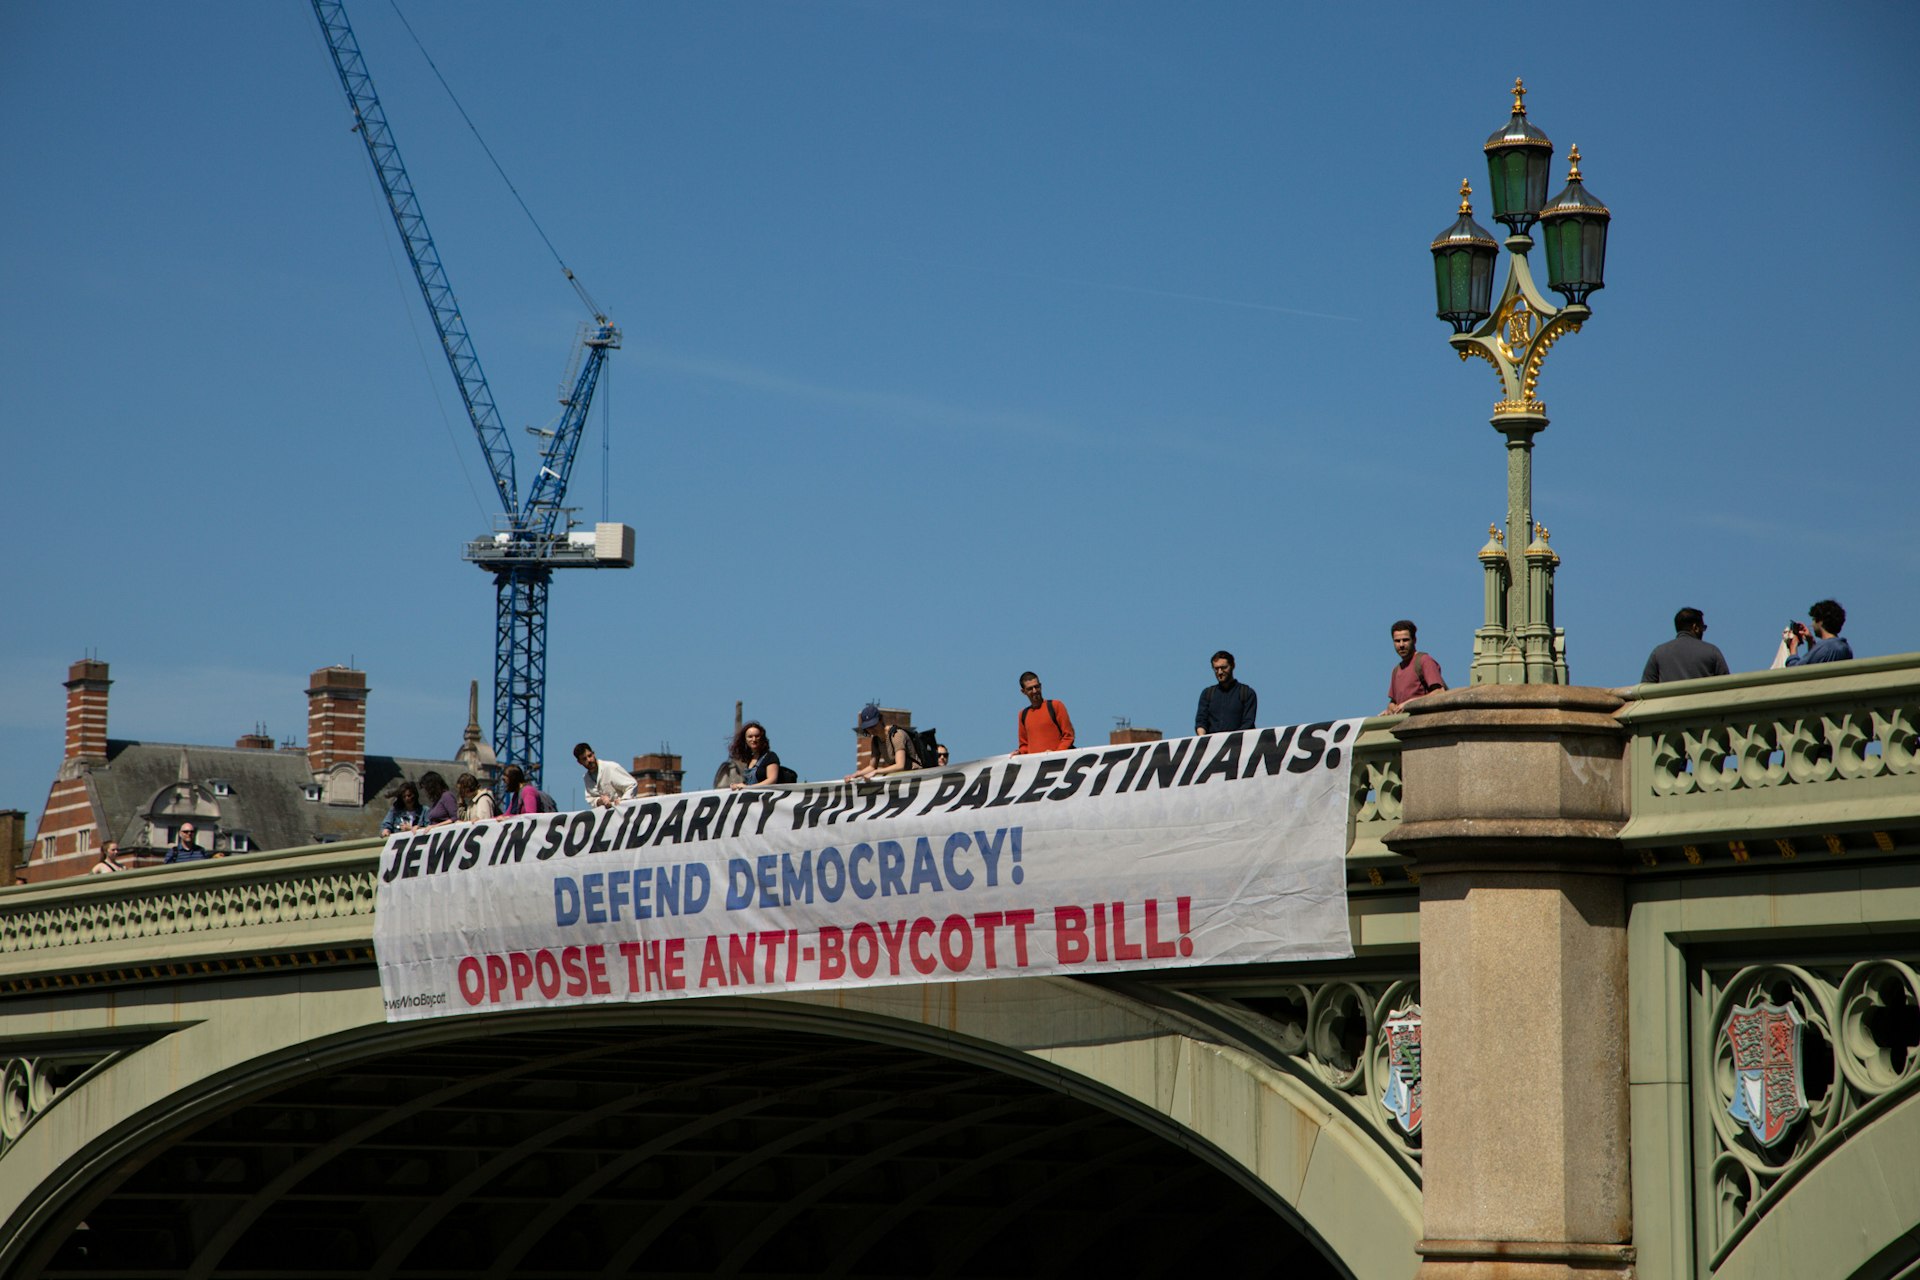 The anti-boycott bill is an attack on our democracy